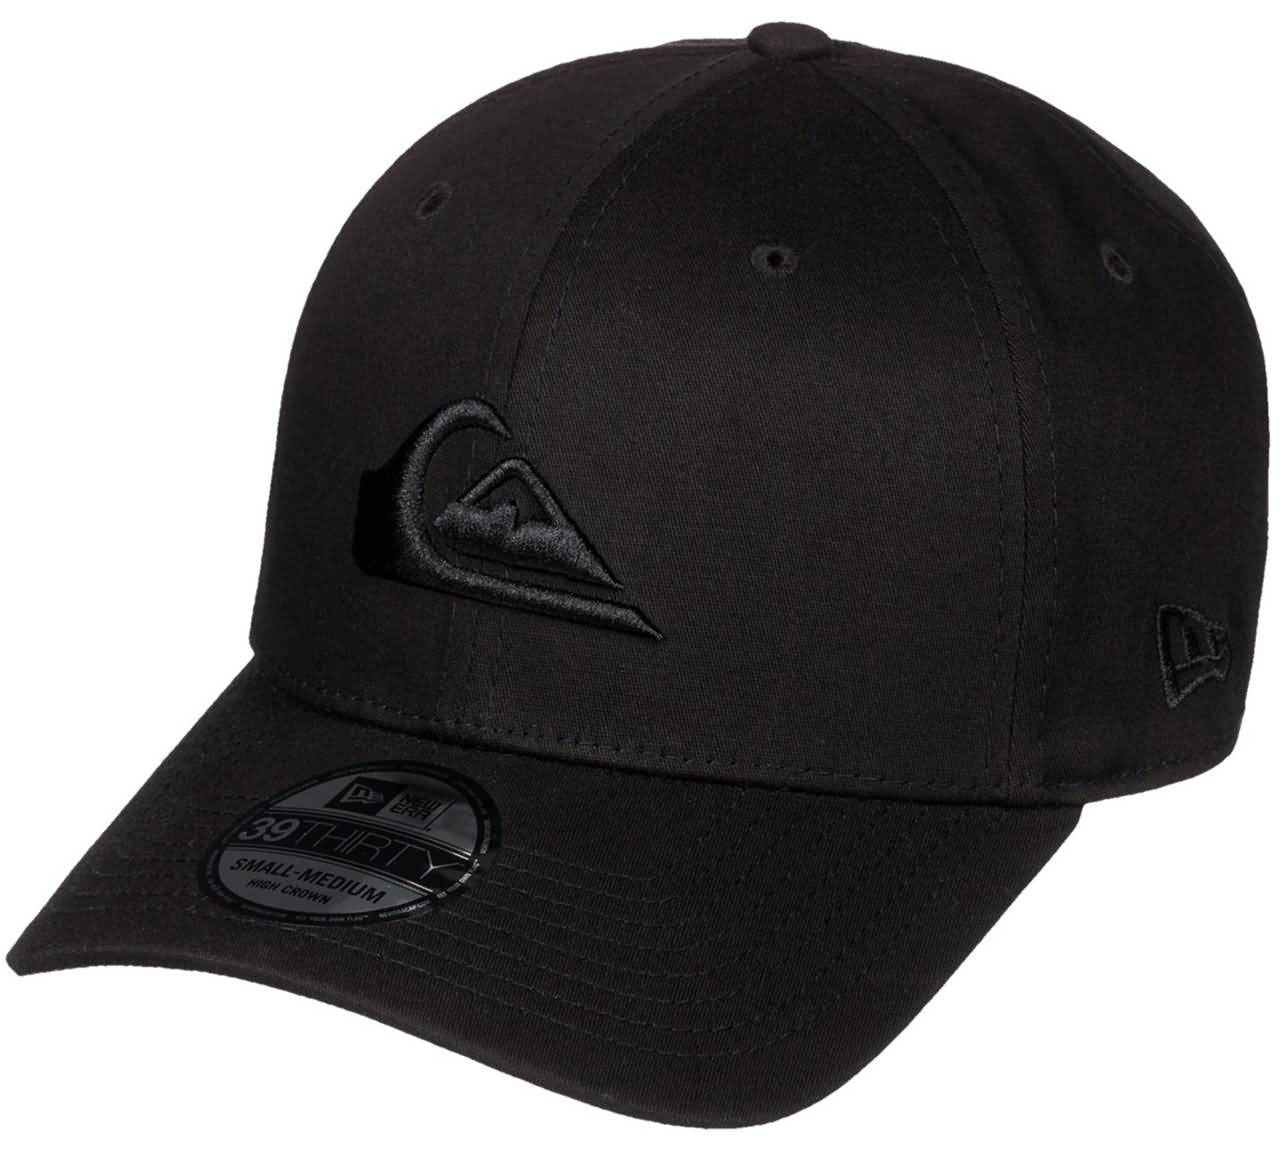 Quiksilver Surf Fall 2017 Mens Accessories Headwear Hats Collection –  OriginBoardshop - Skate/Surf/Sports